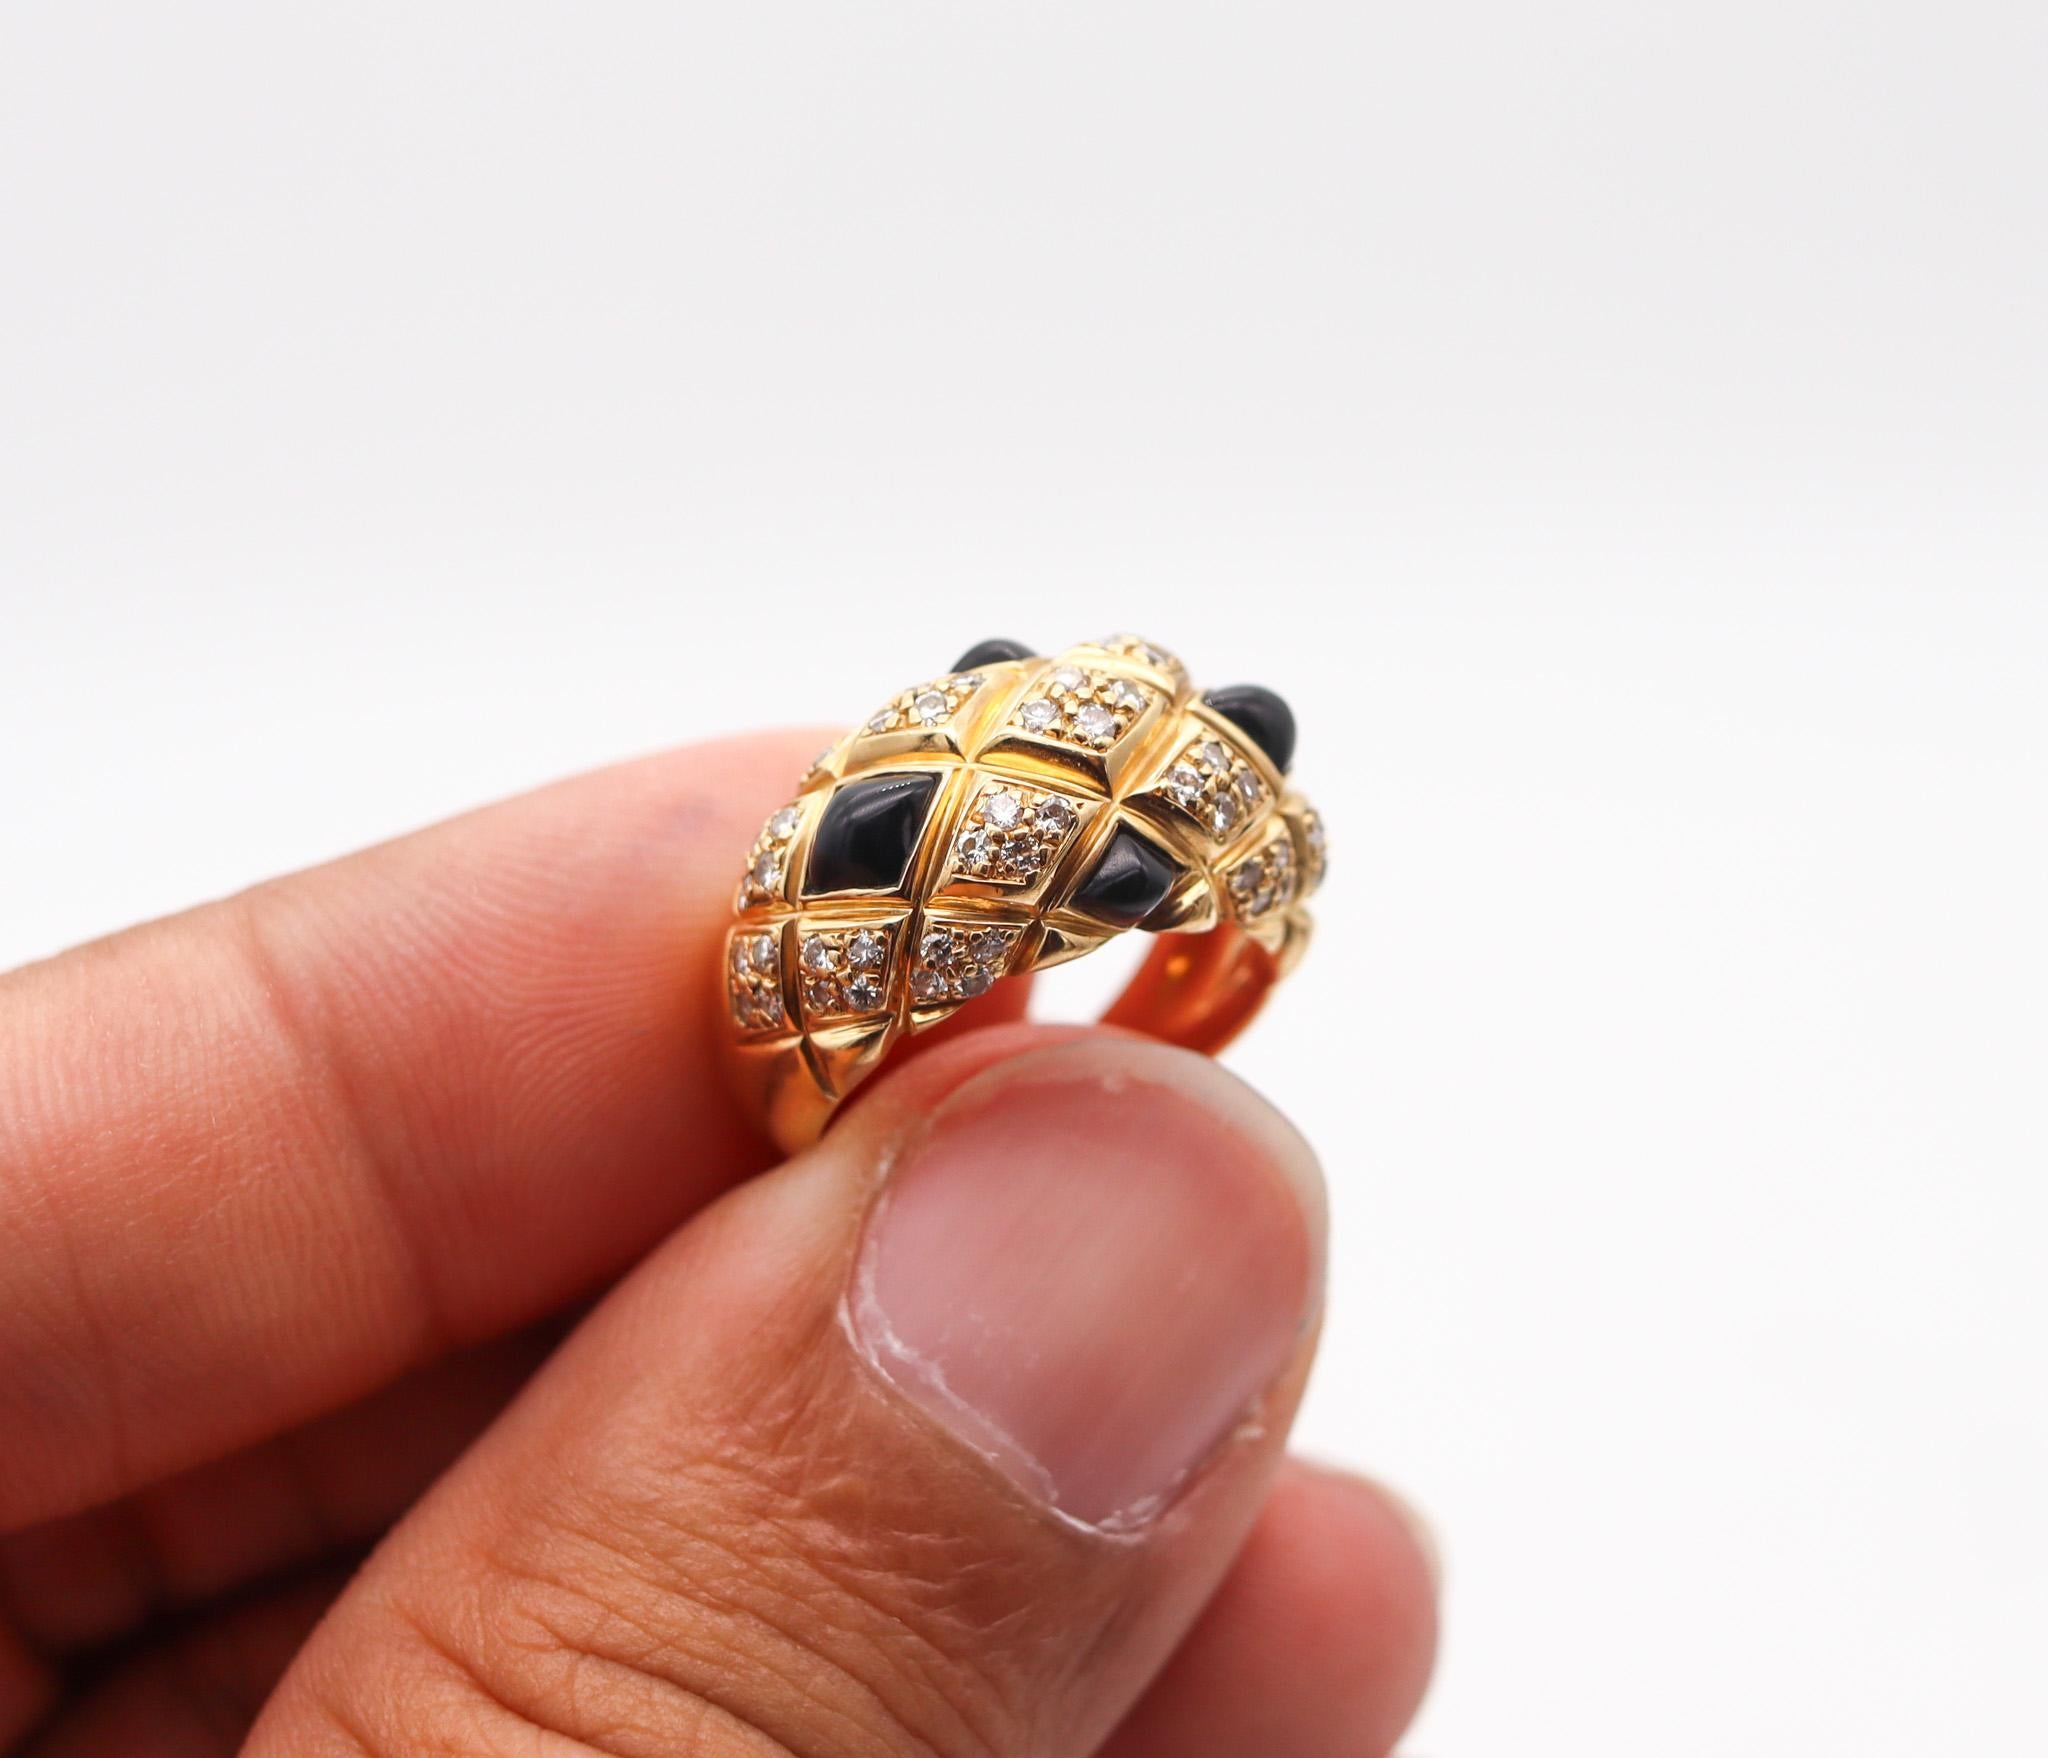 Chaumet Paris Quilted Cocktail Ring In 18Kt Gold With 1.72 Ctw Diamonds And Onyx In Excellent Condition For Sale In Miami, FL